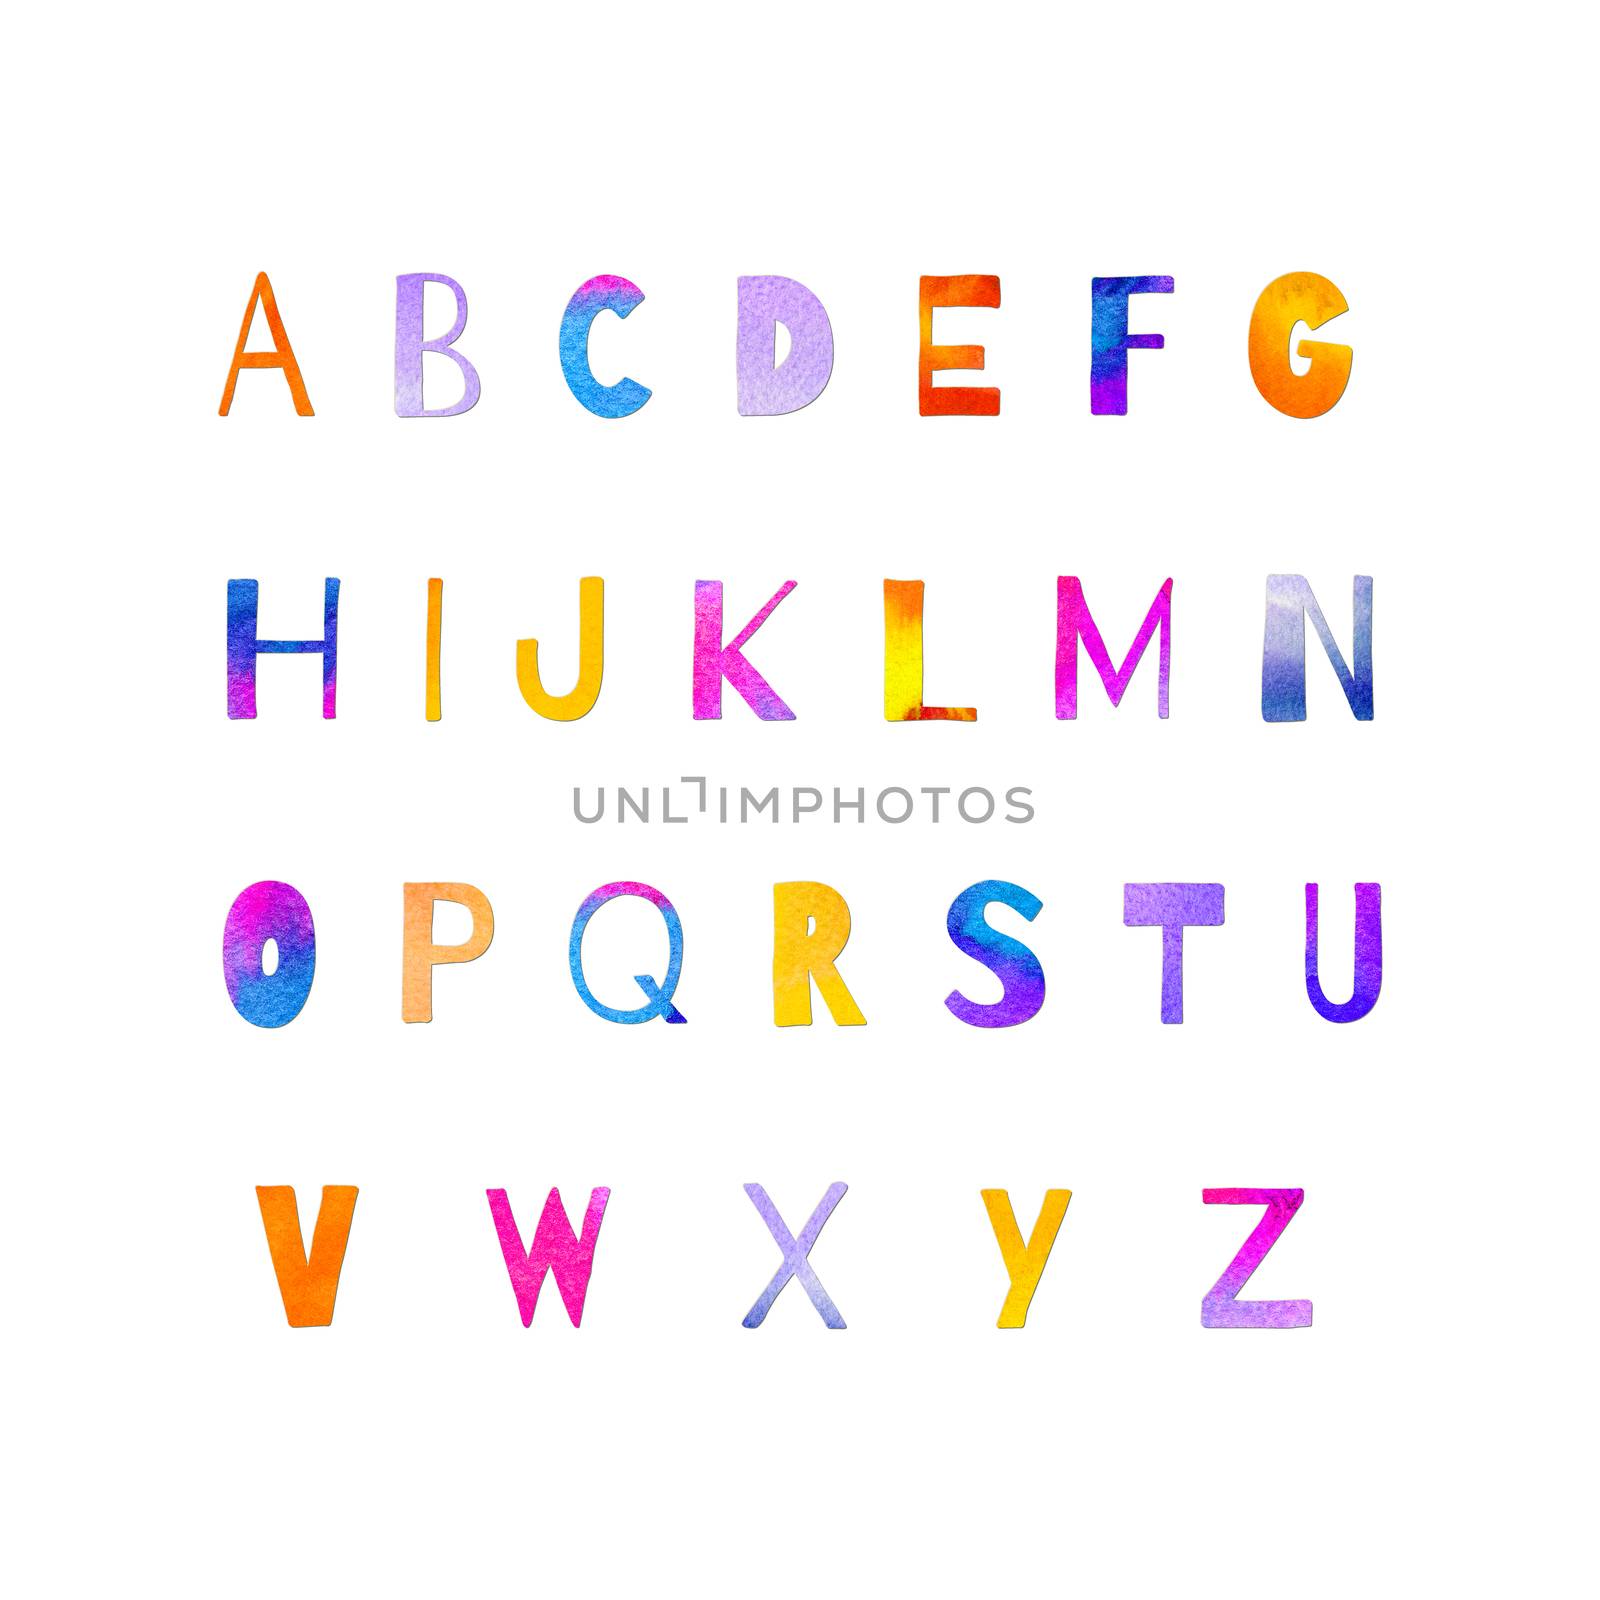 Hand painted watercolor alphabet letters in violet, blue, orange, yellow, pink by LanaLeta